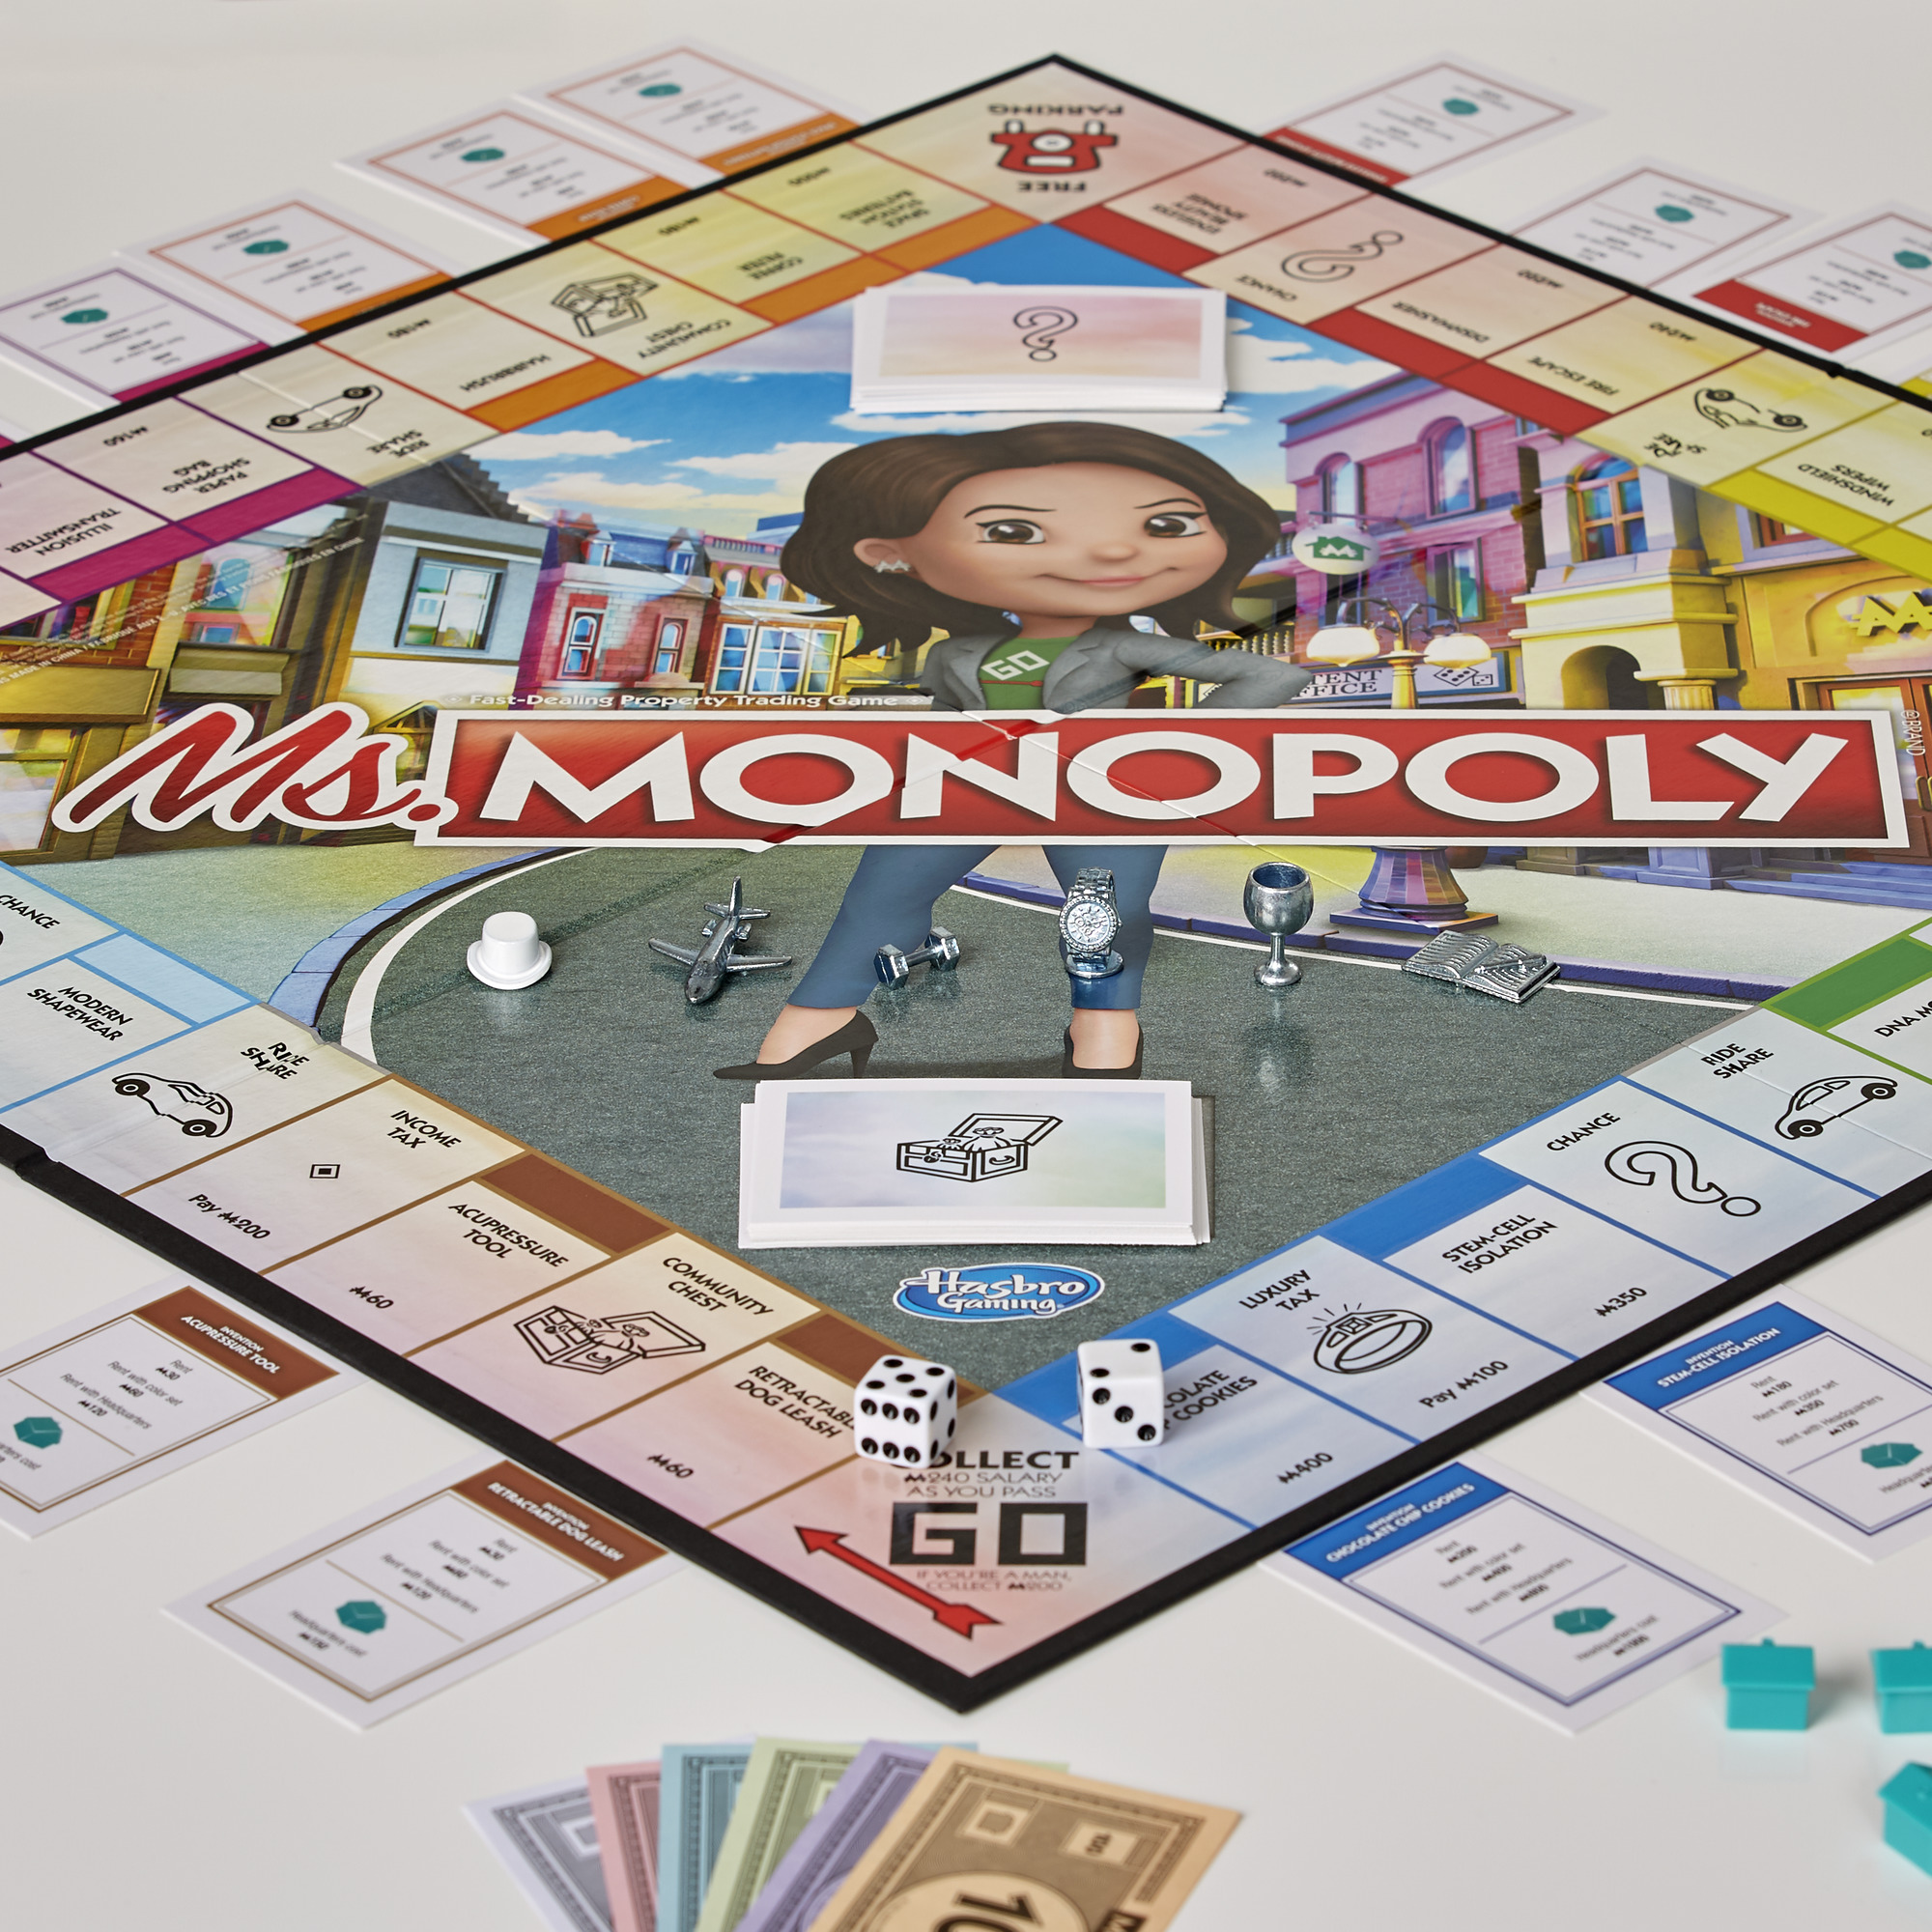 A new "empowered" Monopoly game gives women more money than men